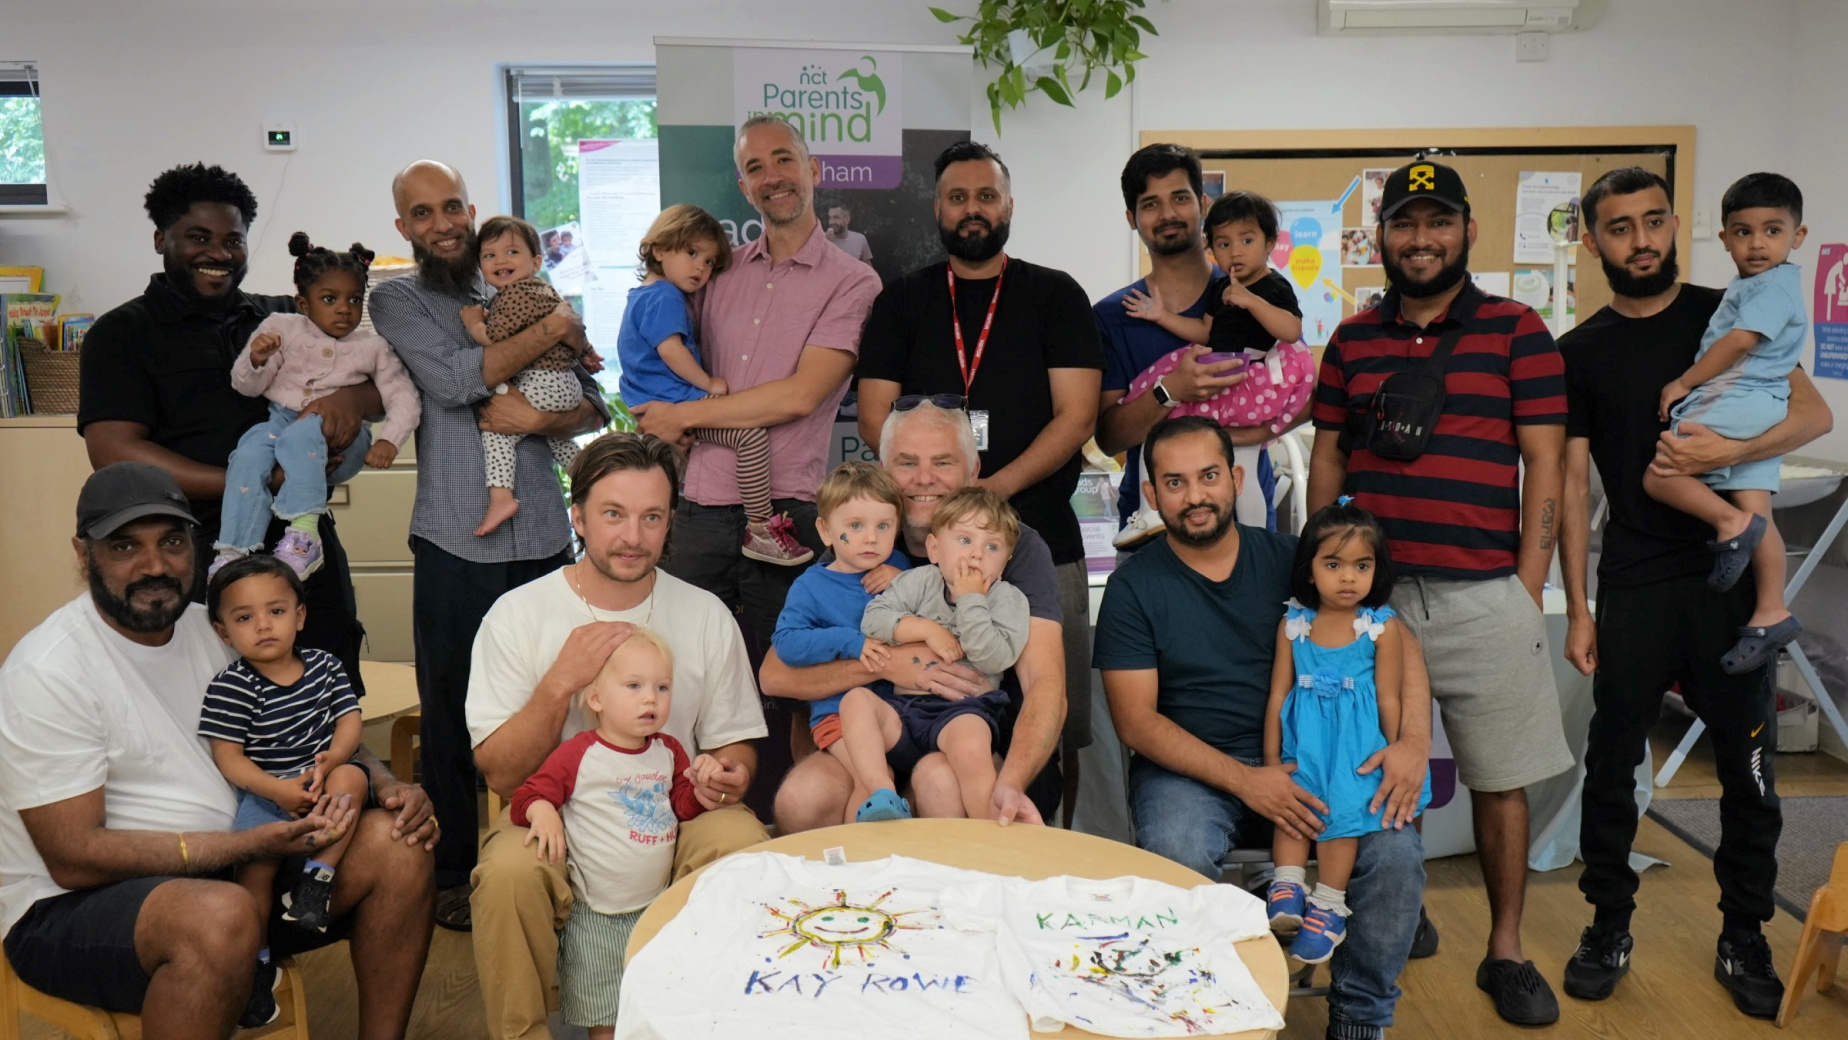 Parents in Mind Newham - Dads and partners